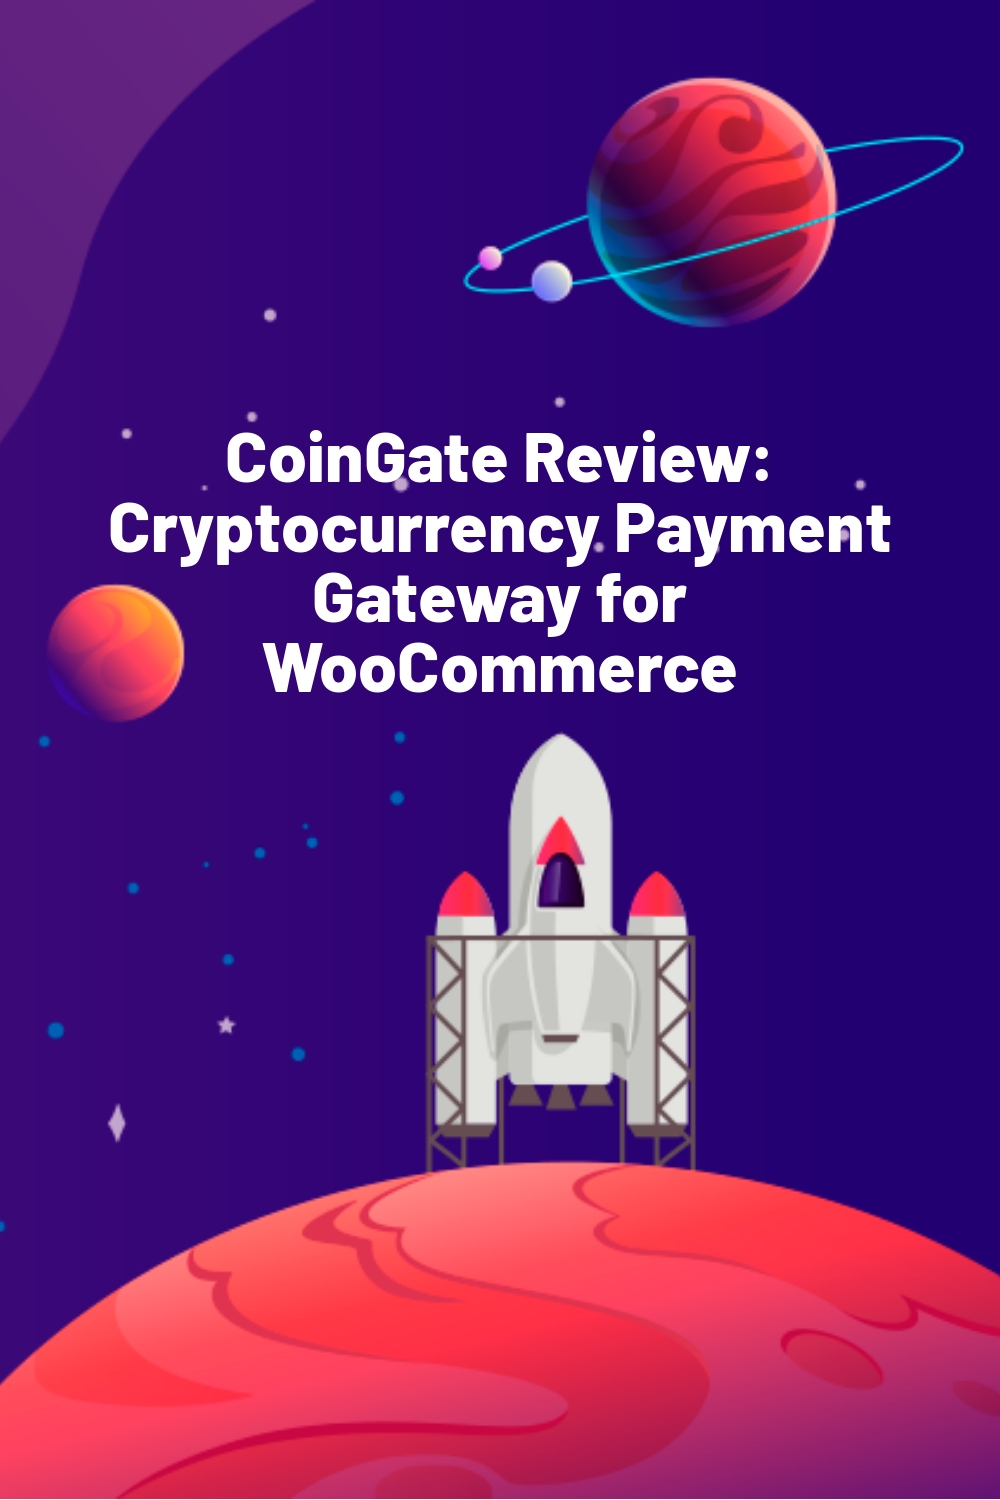 CoinGate Review: Cryptocurrency Payment Gateway for WooCommerce